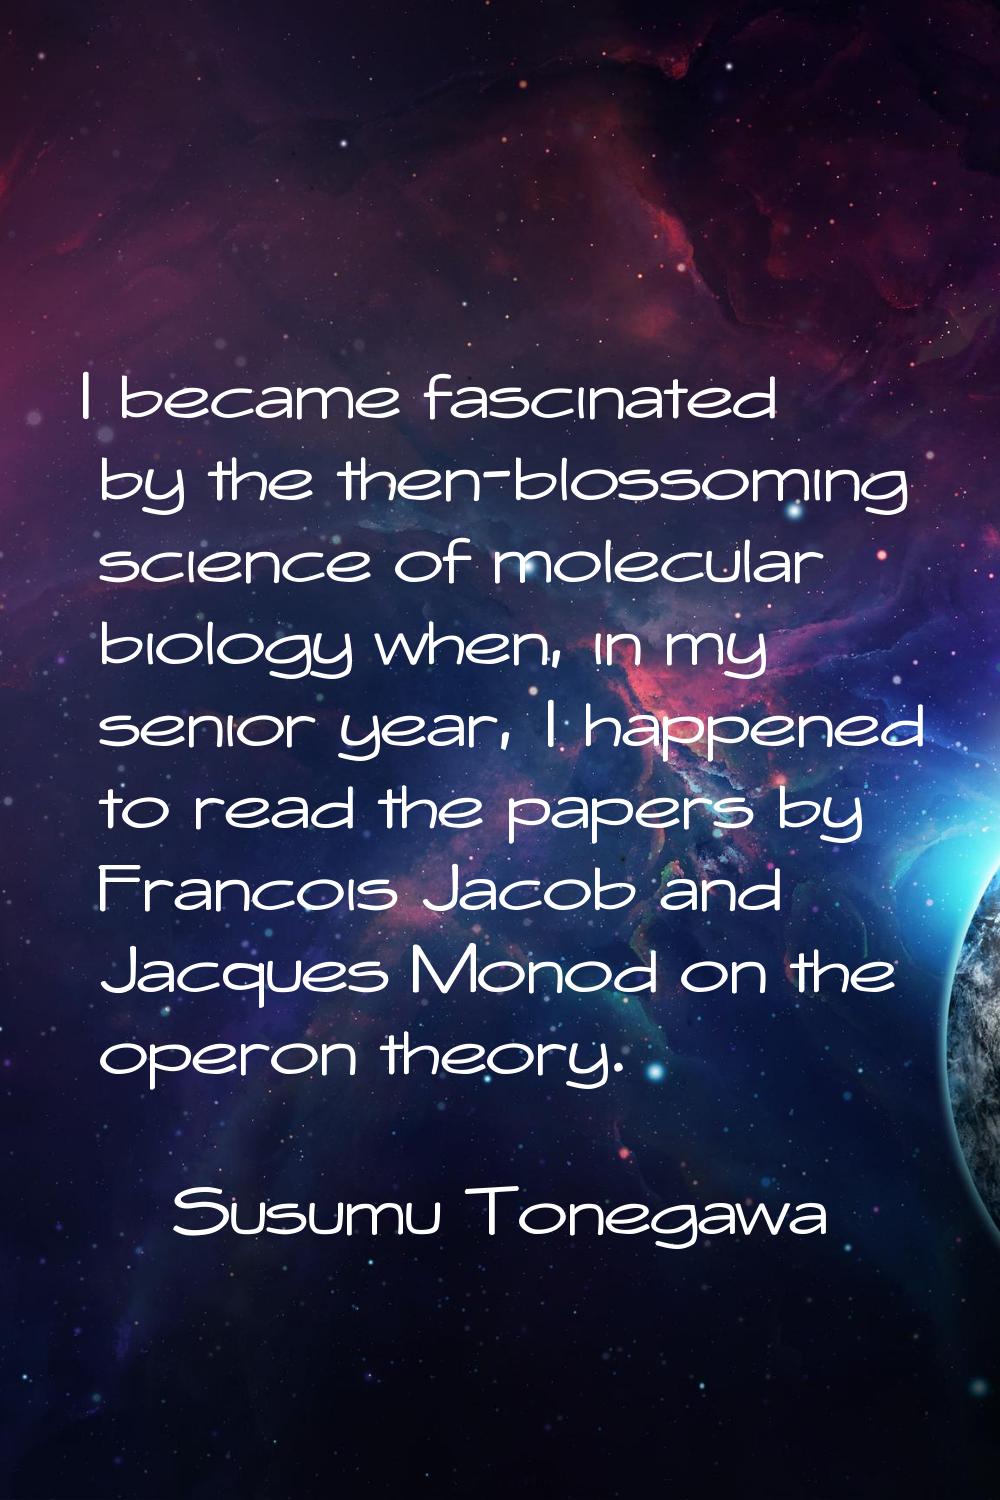 I became fascinated by the then-blossoming science of molecular biology when, in my senior year, I 